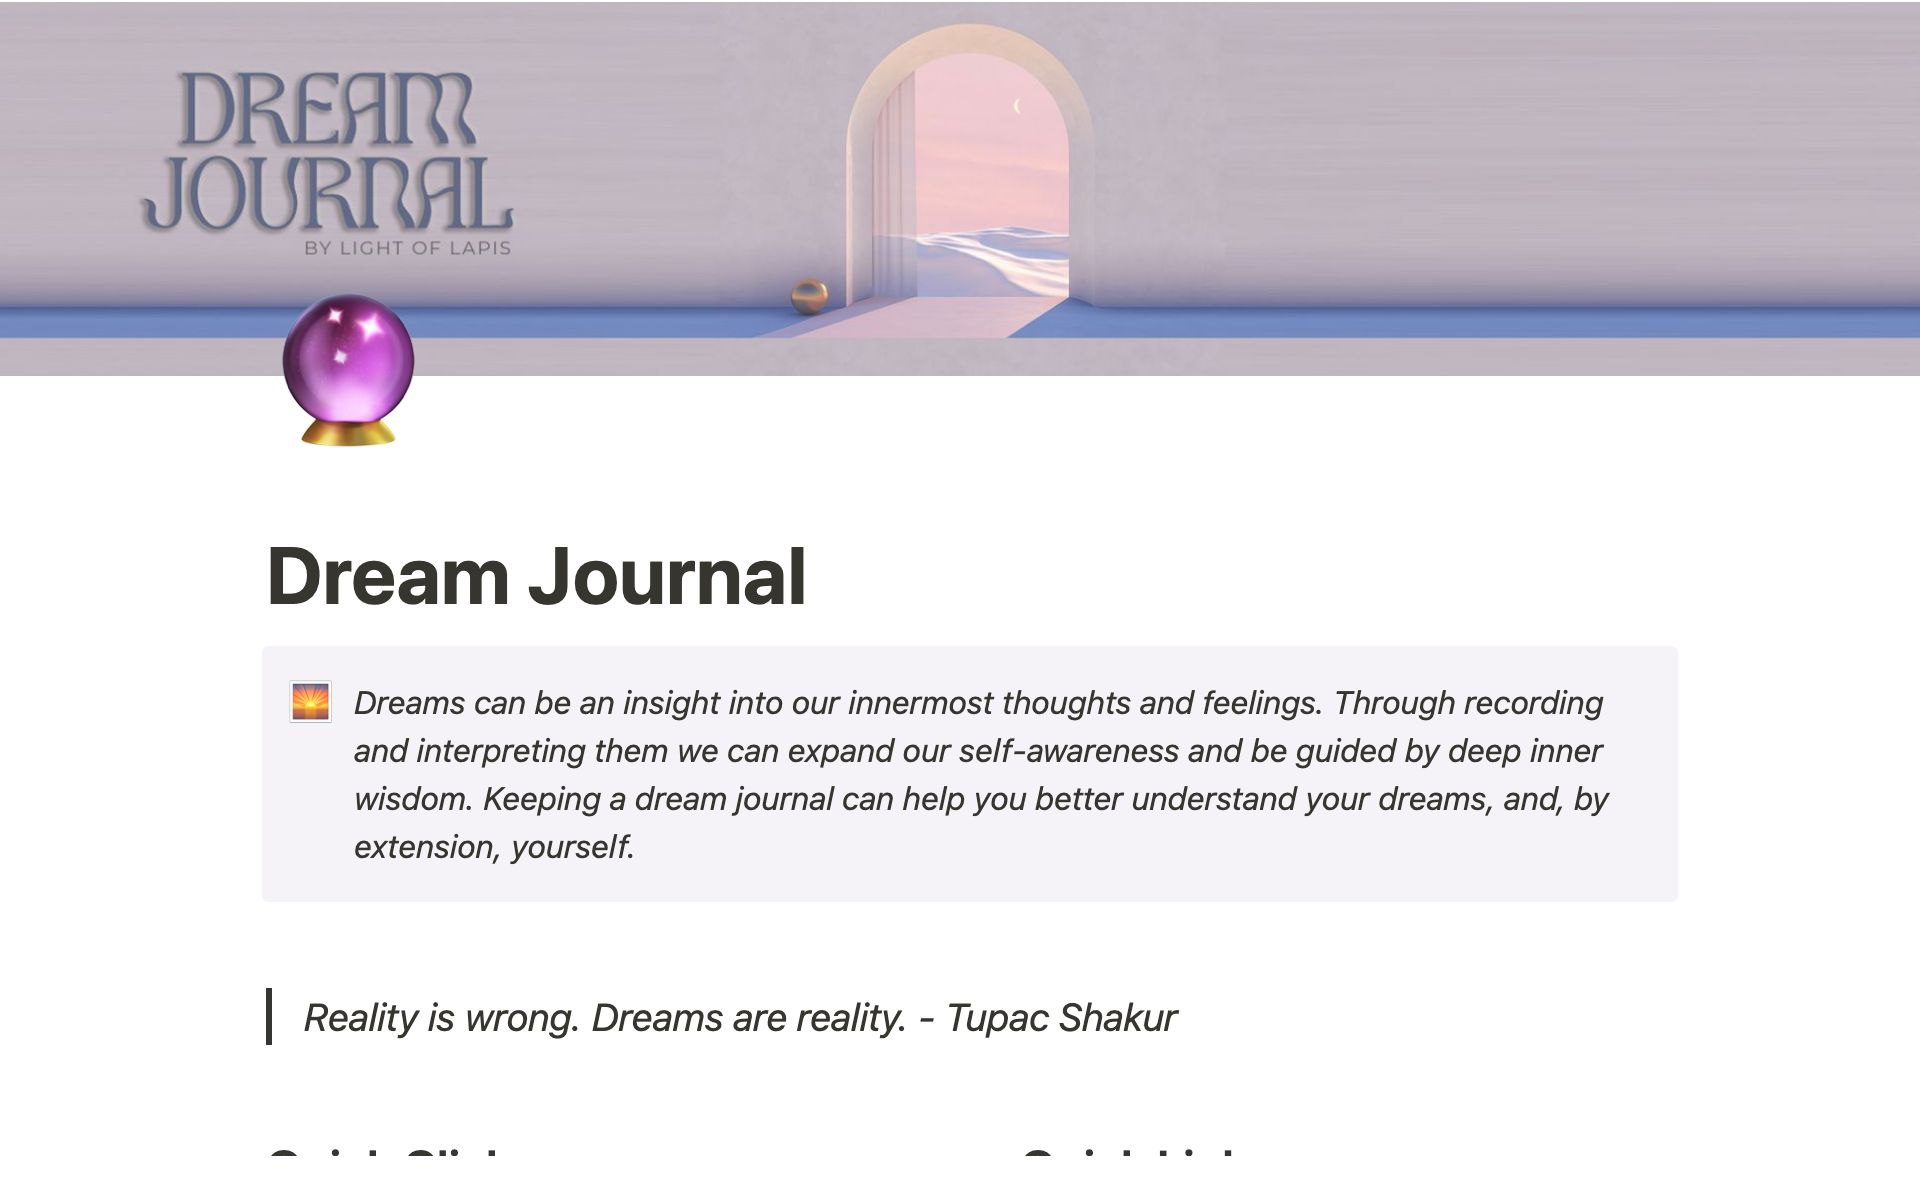 This is a 14 month journal to keep track of your dreams and their interpretations.